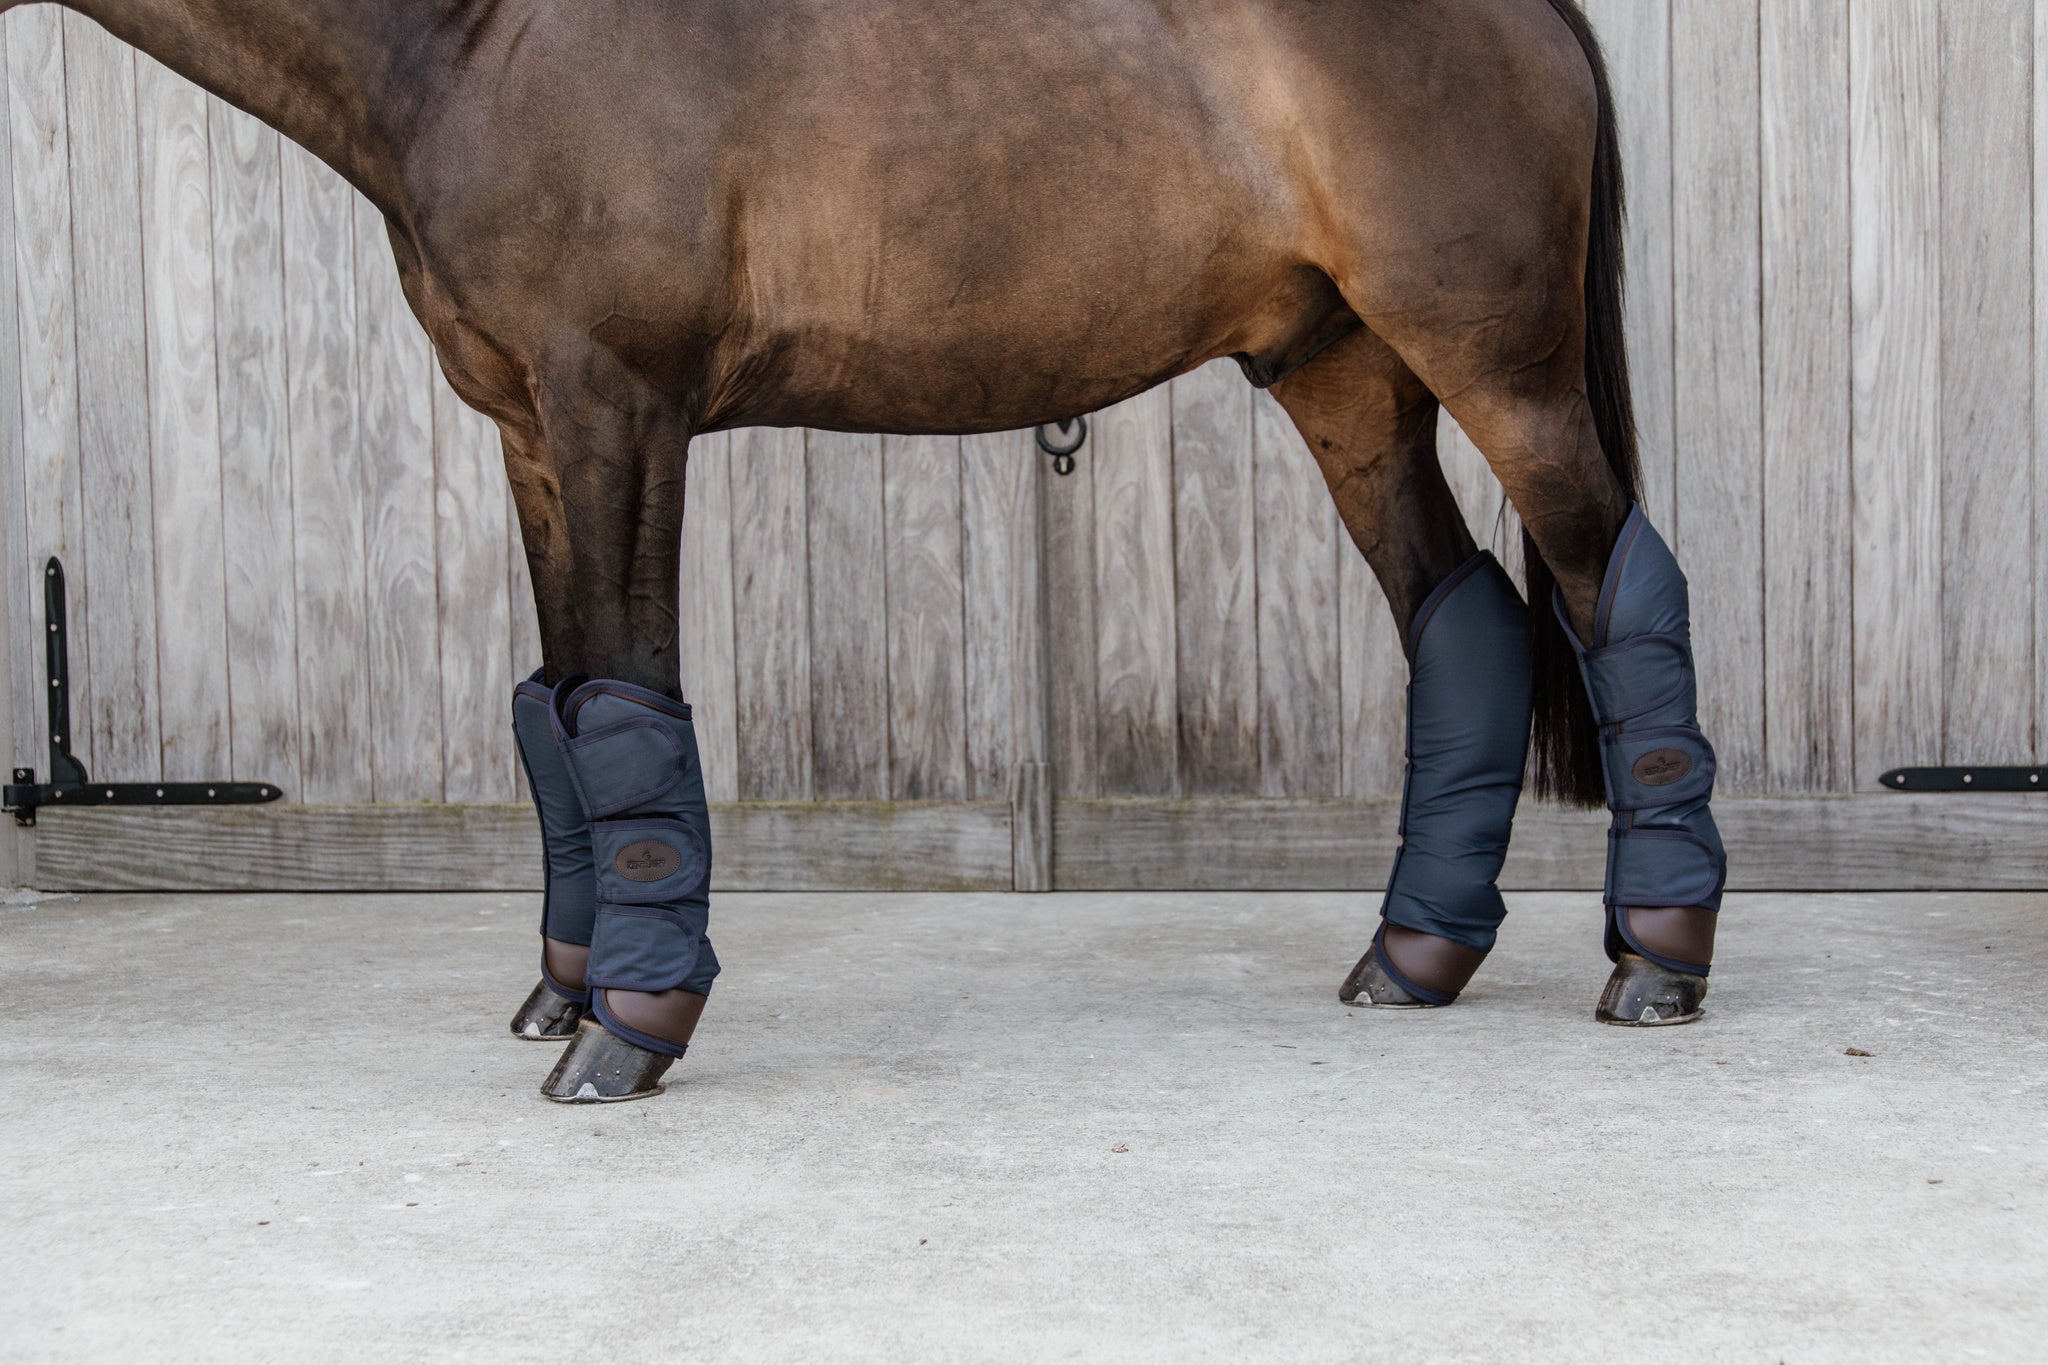 Strong and comfortable, the Kentucky Horsewear Travel Boots protect the tendon and fetlock area, including the pastern and hocks of your horse during transport. Thanks to the durable materials the travel boots will protect your horse for every journey.